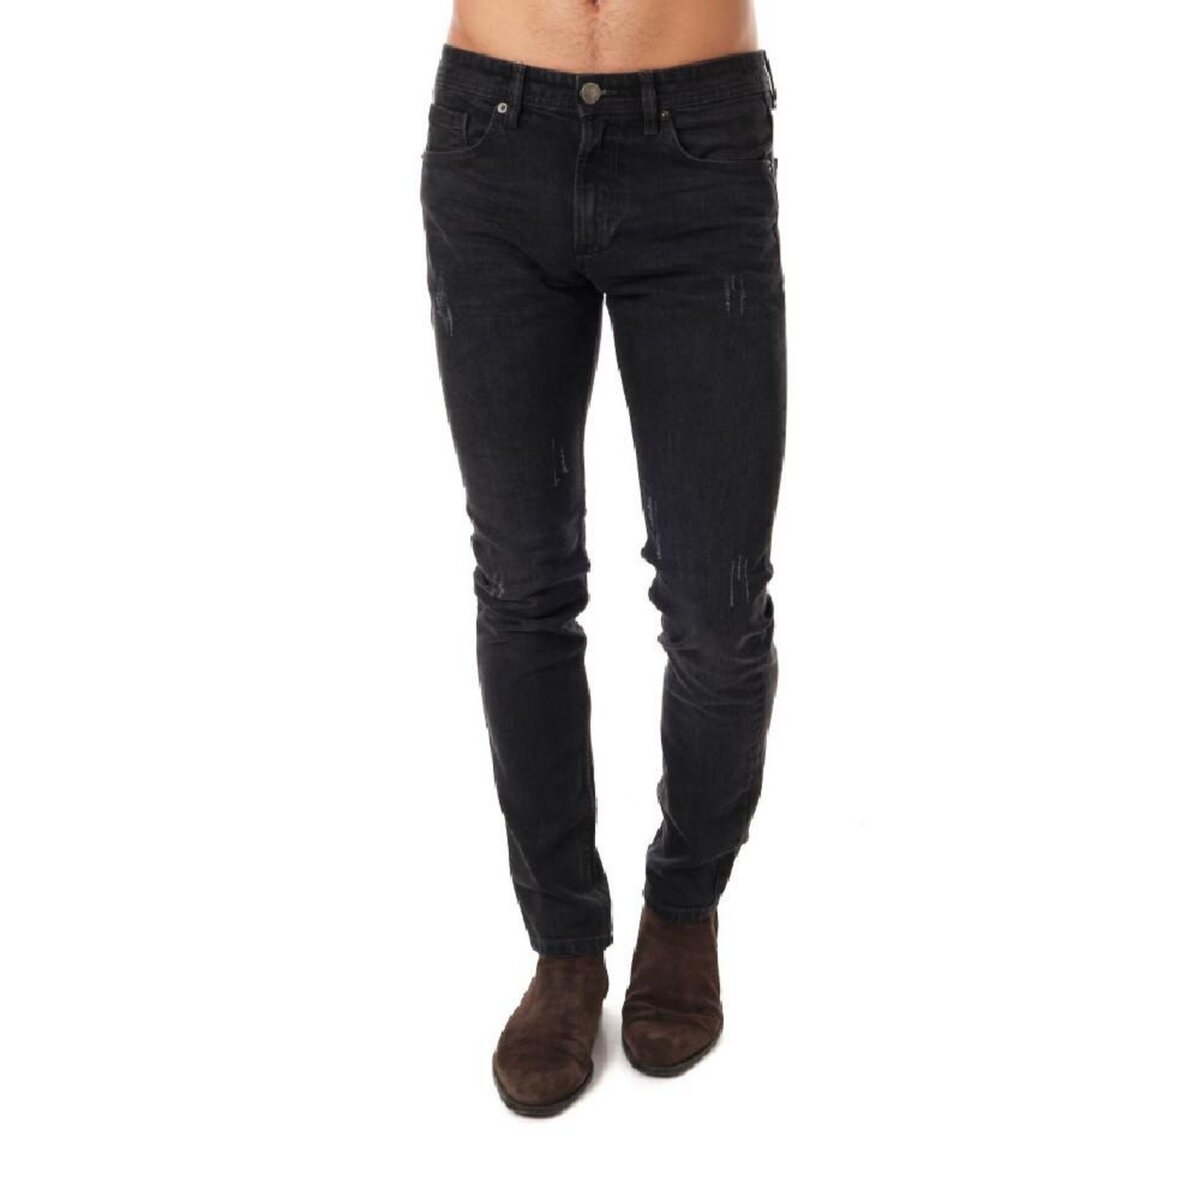 PANAME BROTHERS Jean noir homme Paname Brothers Jimmy